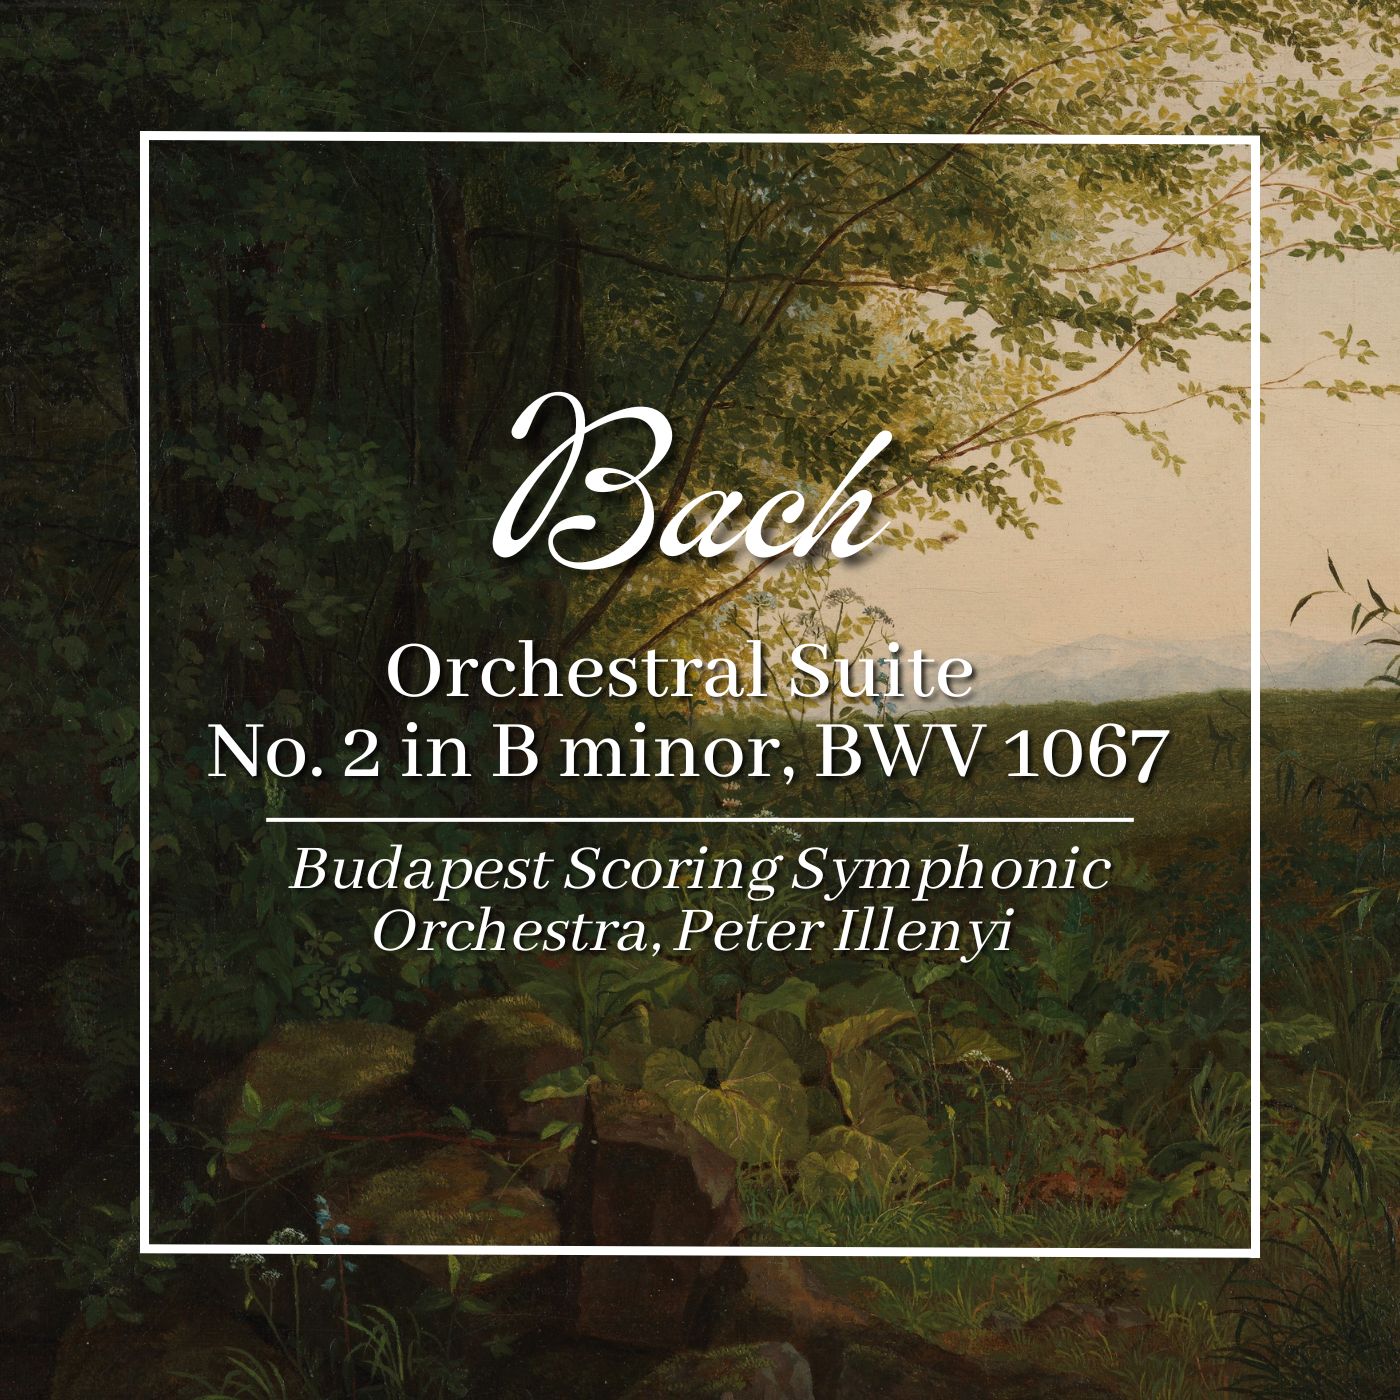 Bach: Orchestral Suite No. 2 in B minor, BWV 1067